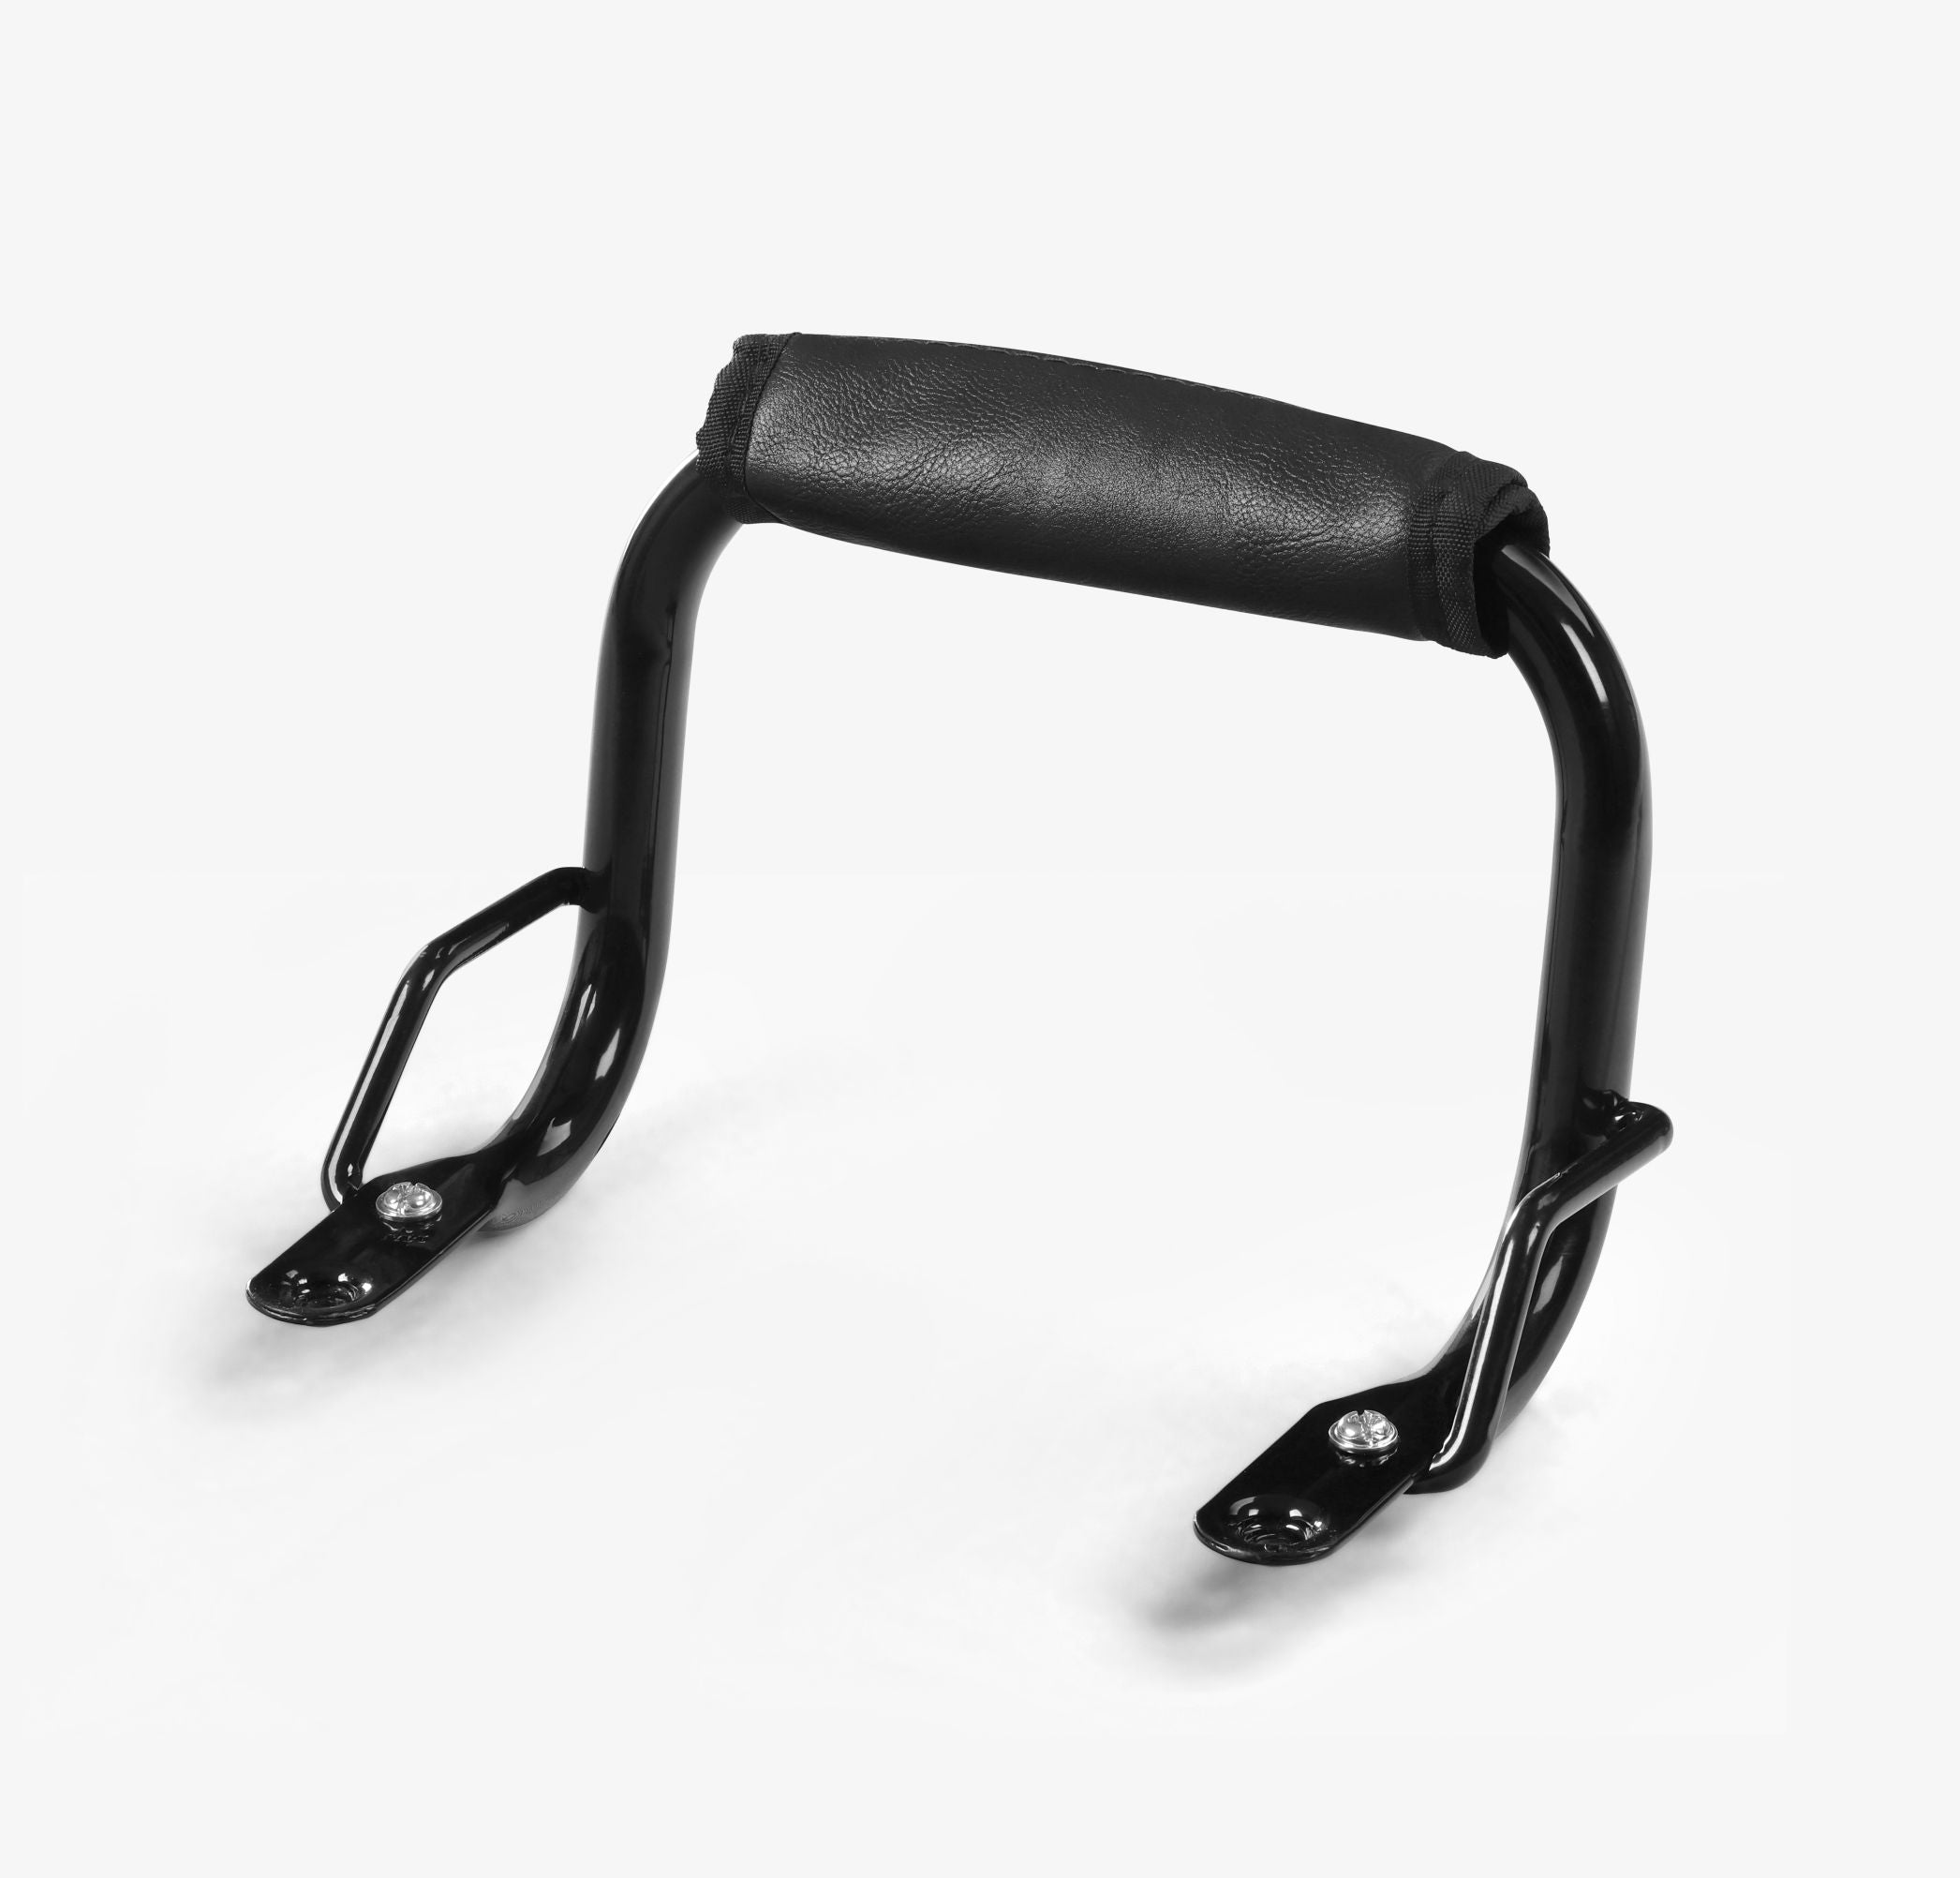 Backrest Suitable for Ola S1 and Ola S1 Pro Electric Scooter